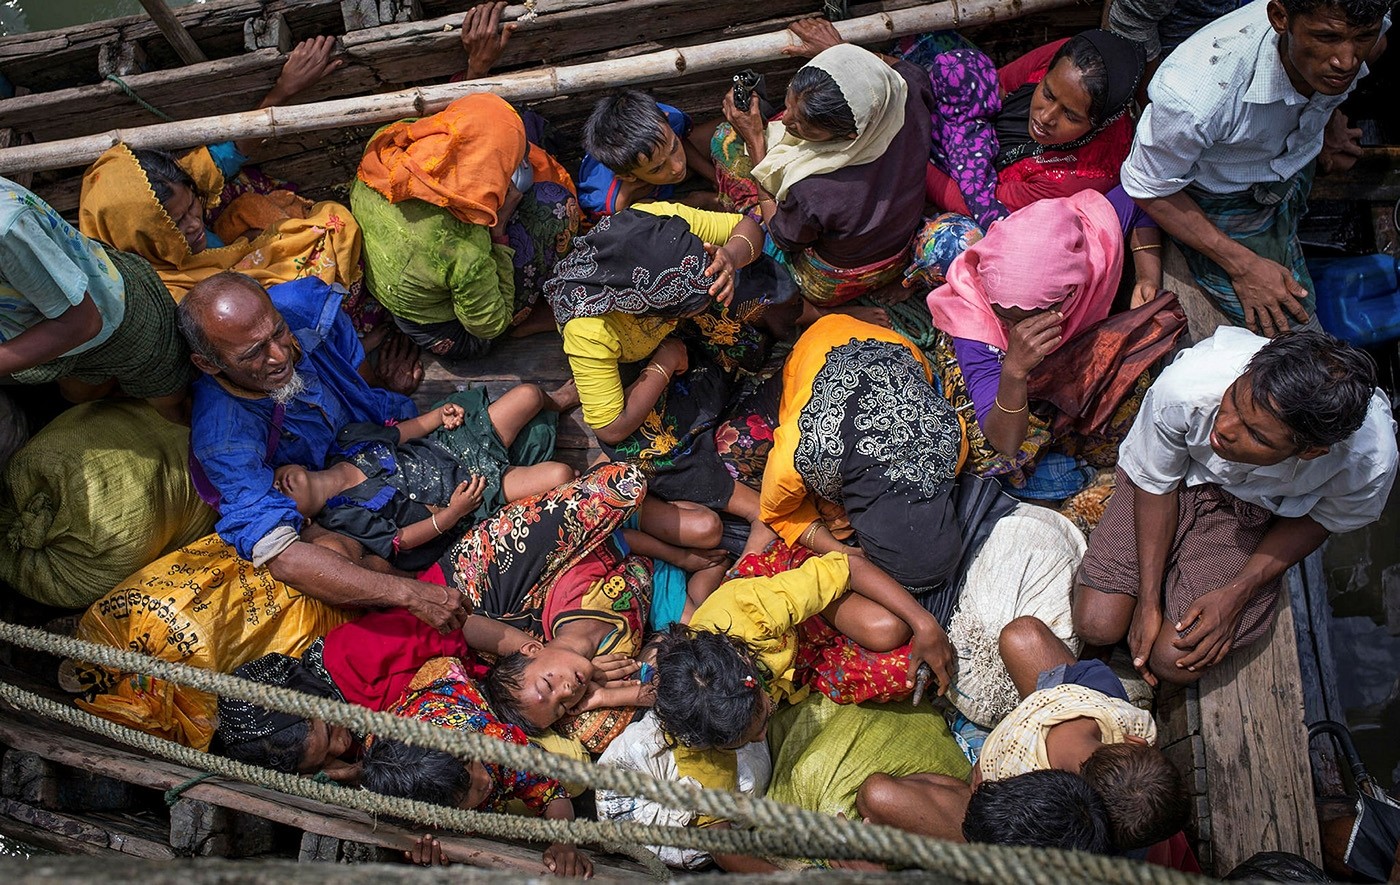 Rohingya refugees arriving by boat at Shah Parir Dwip on the Bangladesh side of the Naf River on Sept. 12. (AFP Photo)